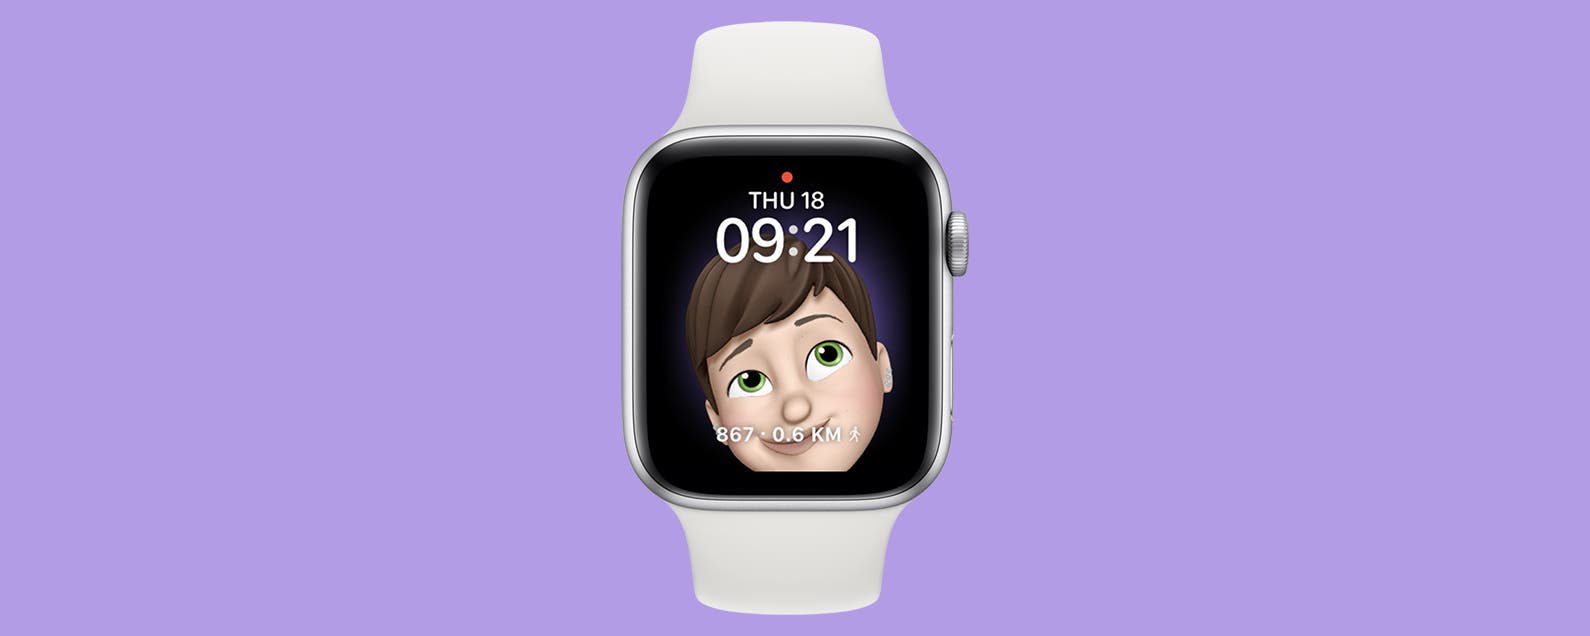 The Best Apple Watch Faces That Do Not Kill The Battery